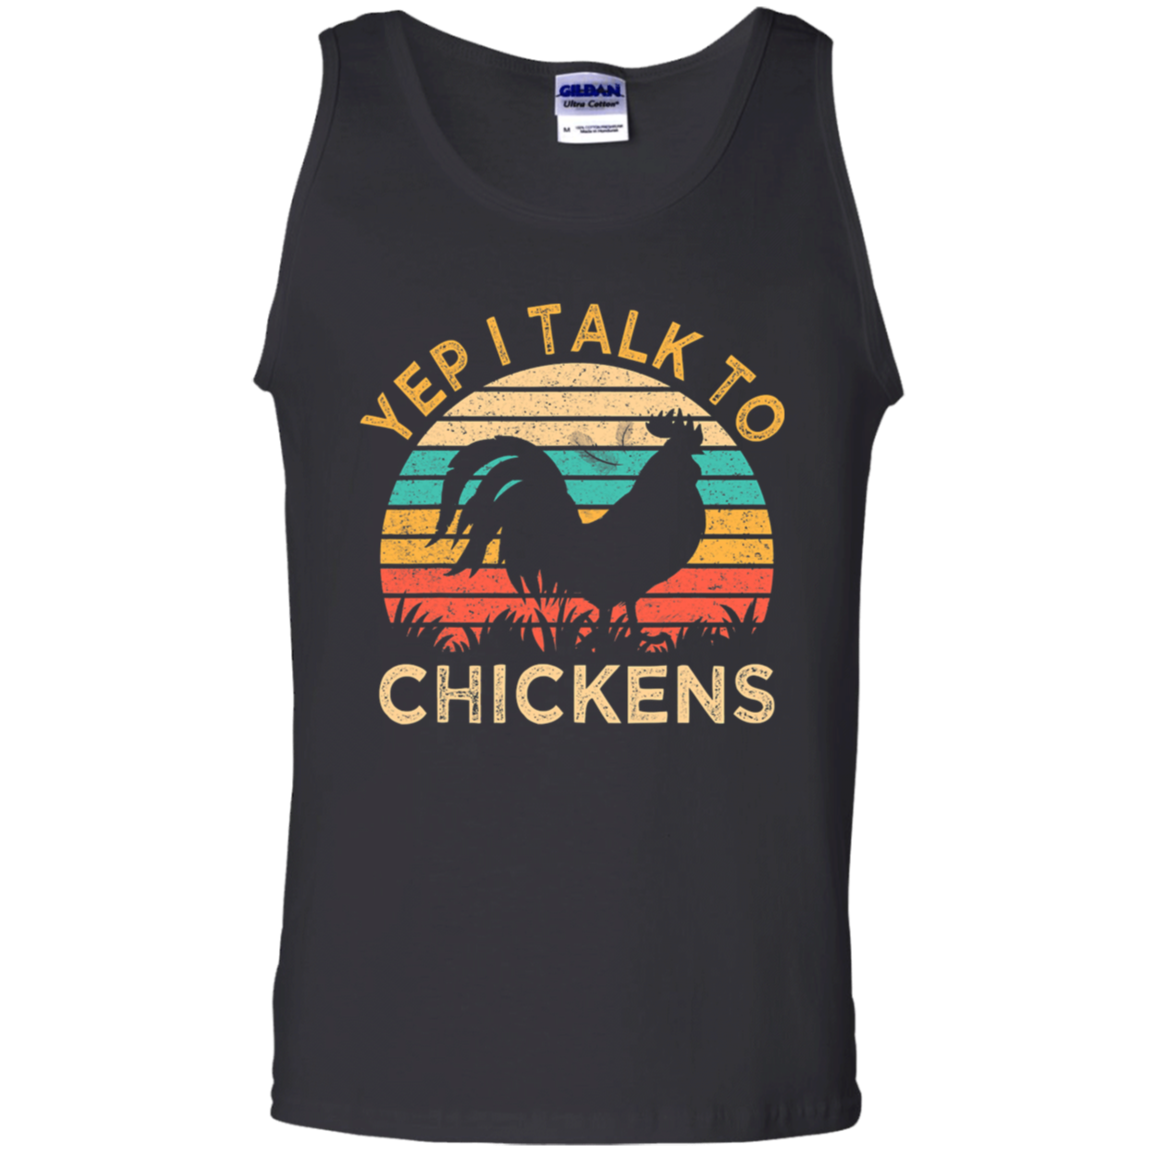 Chickens Vintage Funny Tank Top